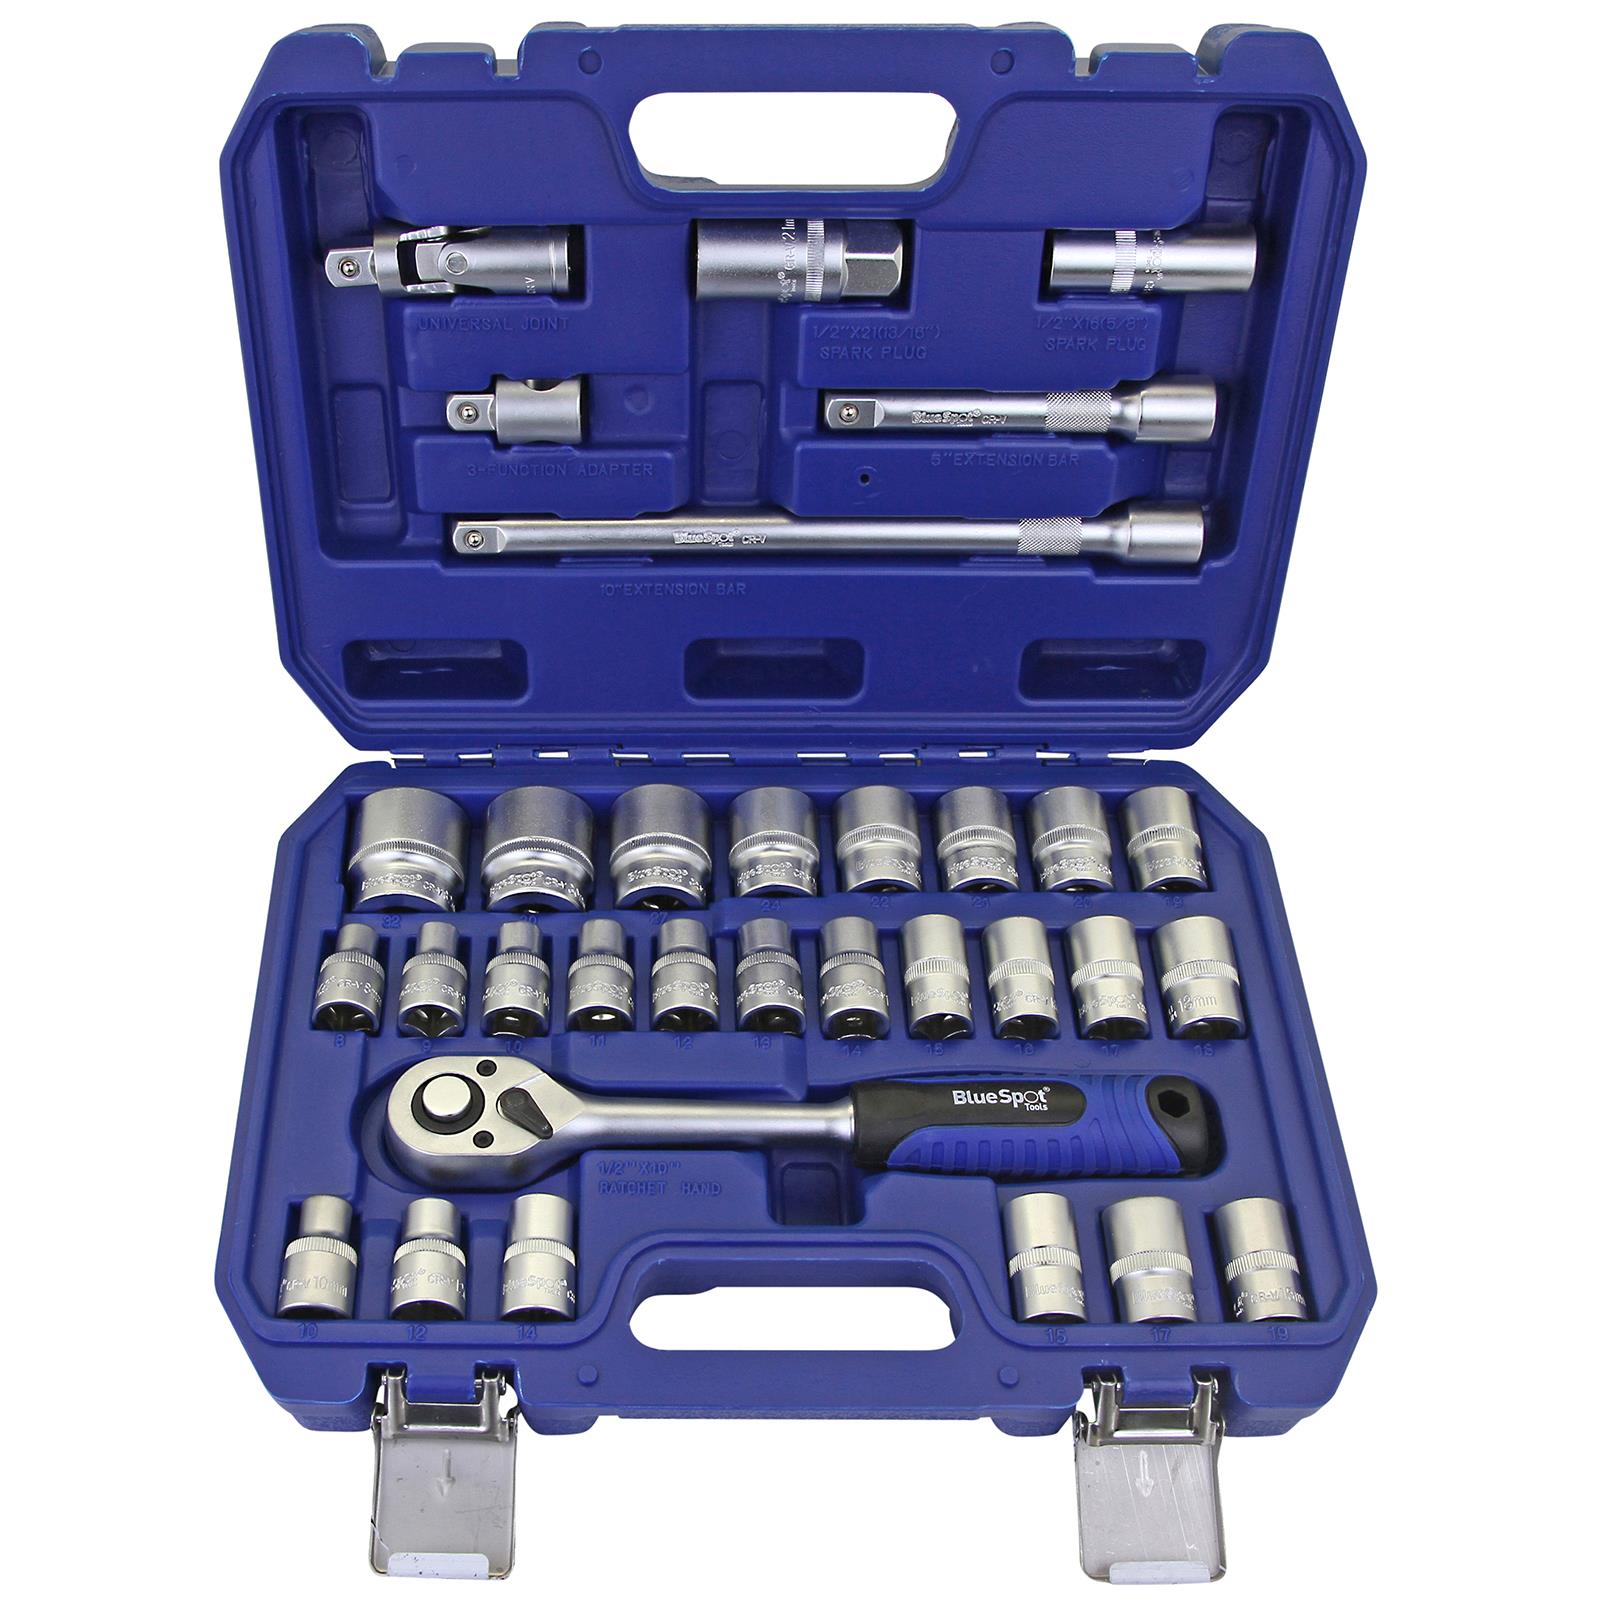 BlueSpot Socket Set Metric 1/2" Drive 8-32mm 32 Pieces with Accessories in Case